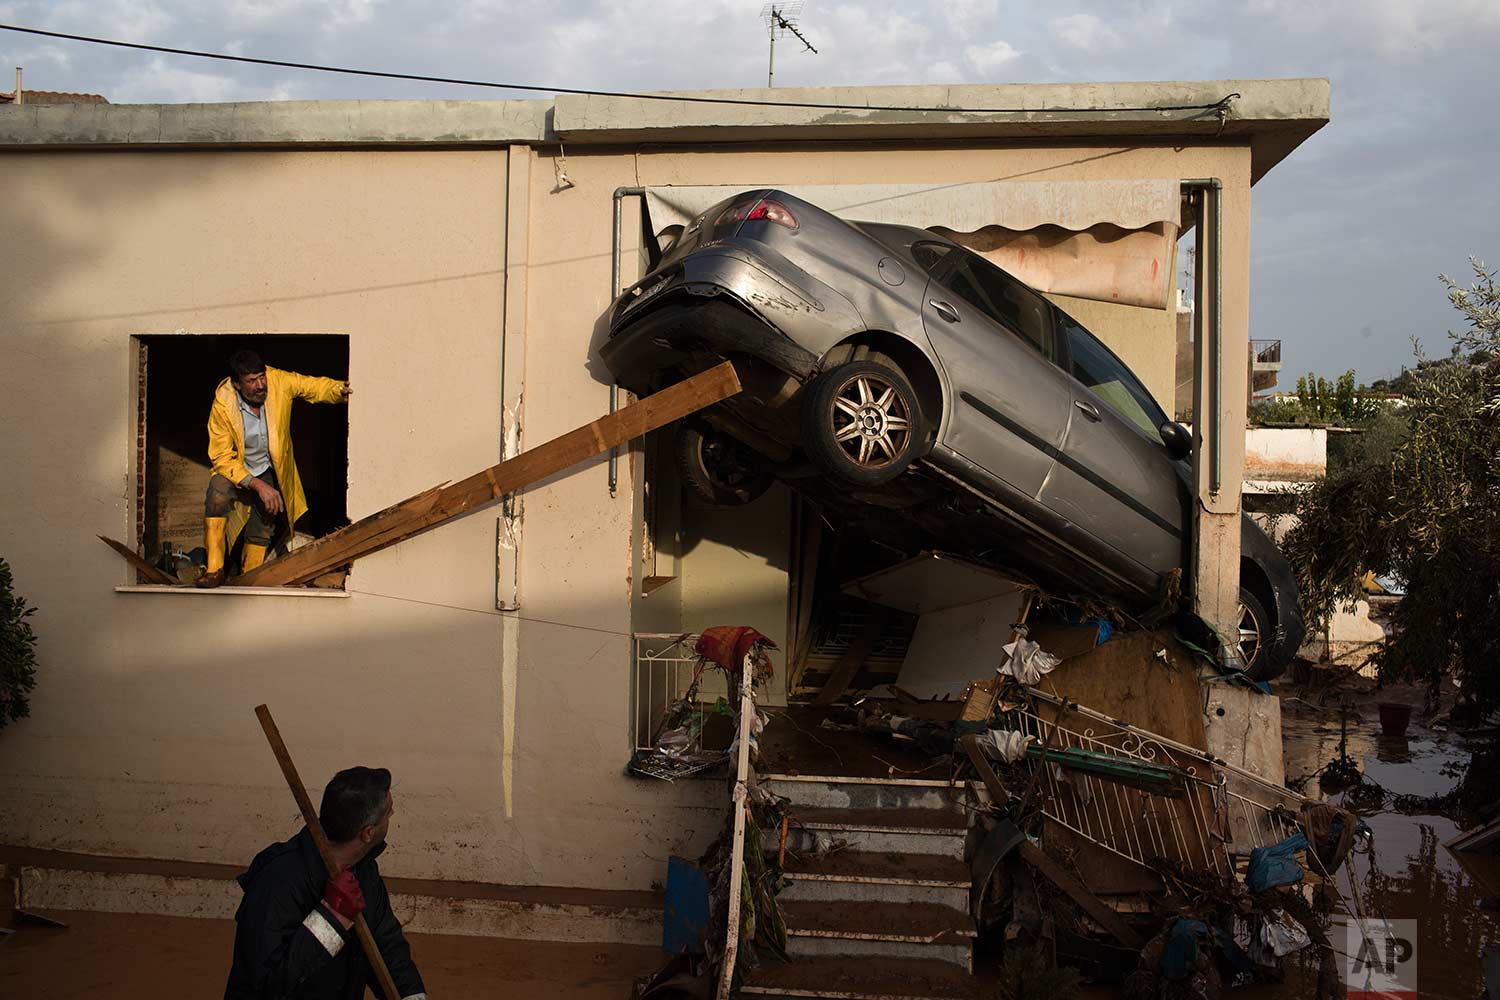  In this Thursday, Nov. 16, 2017 photo, workers try to remove a vehicle wedged into the entrance of a home in the town of Mandra western Athens. A major flash flooding on Wednesday that left at least 21 people dead, turned streets into torrents of mu